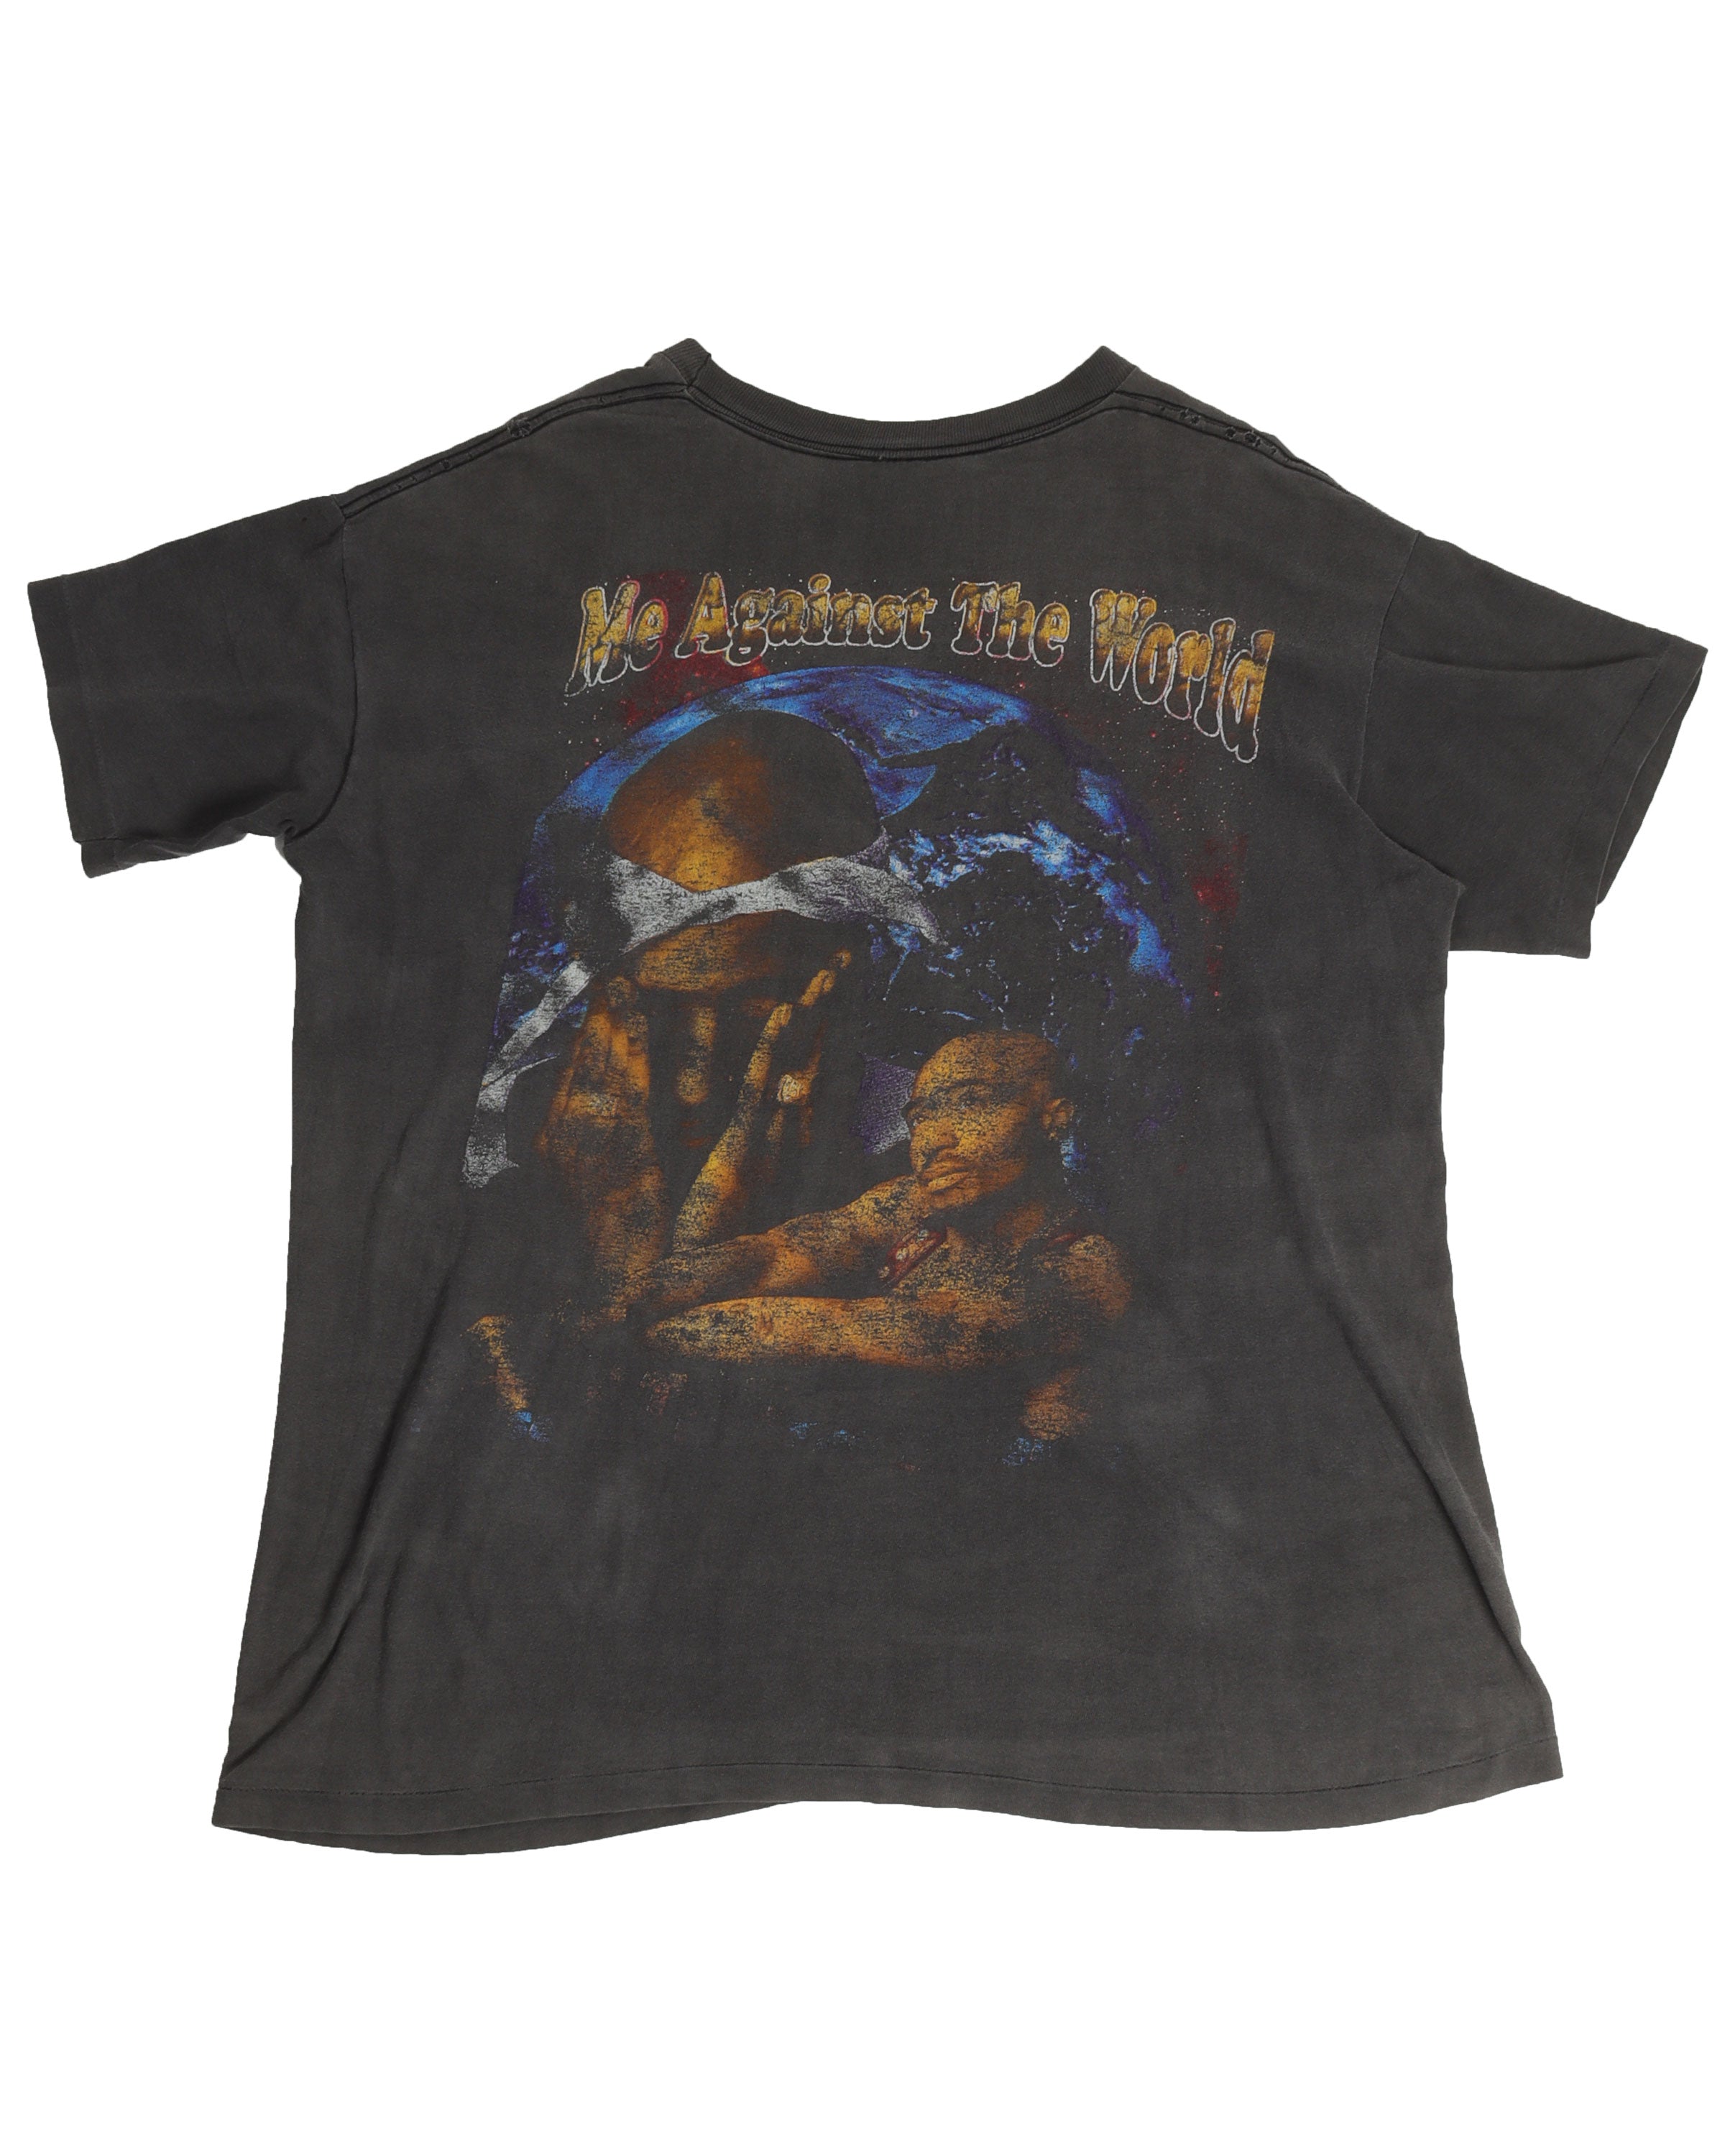 Tupac "Me Against The World" T-Shirt